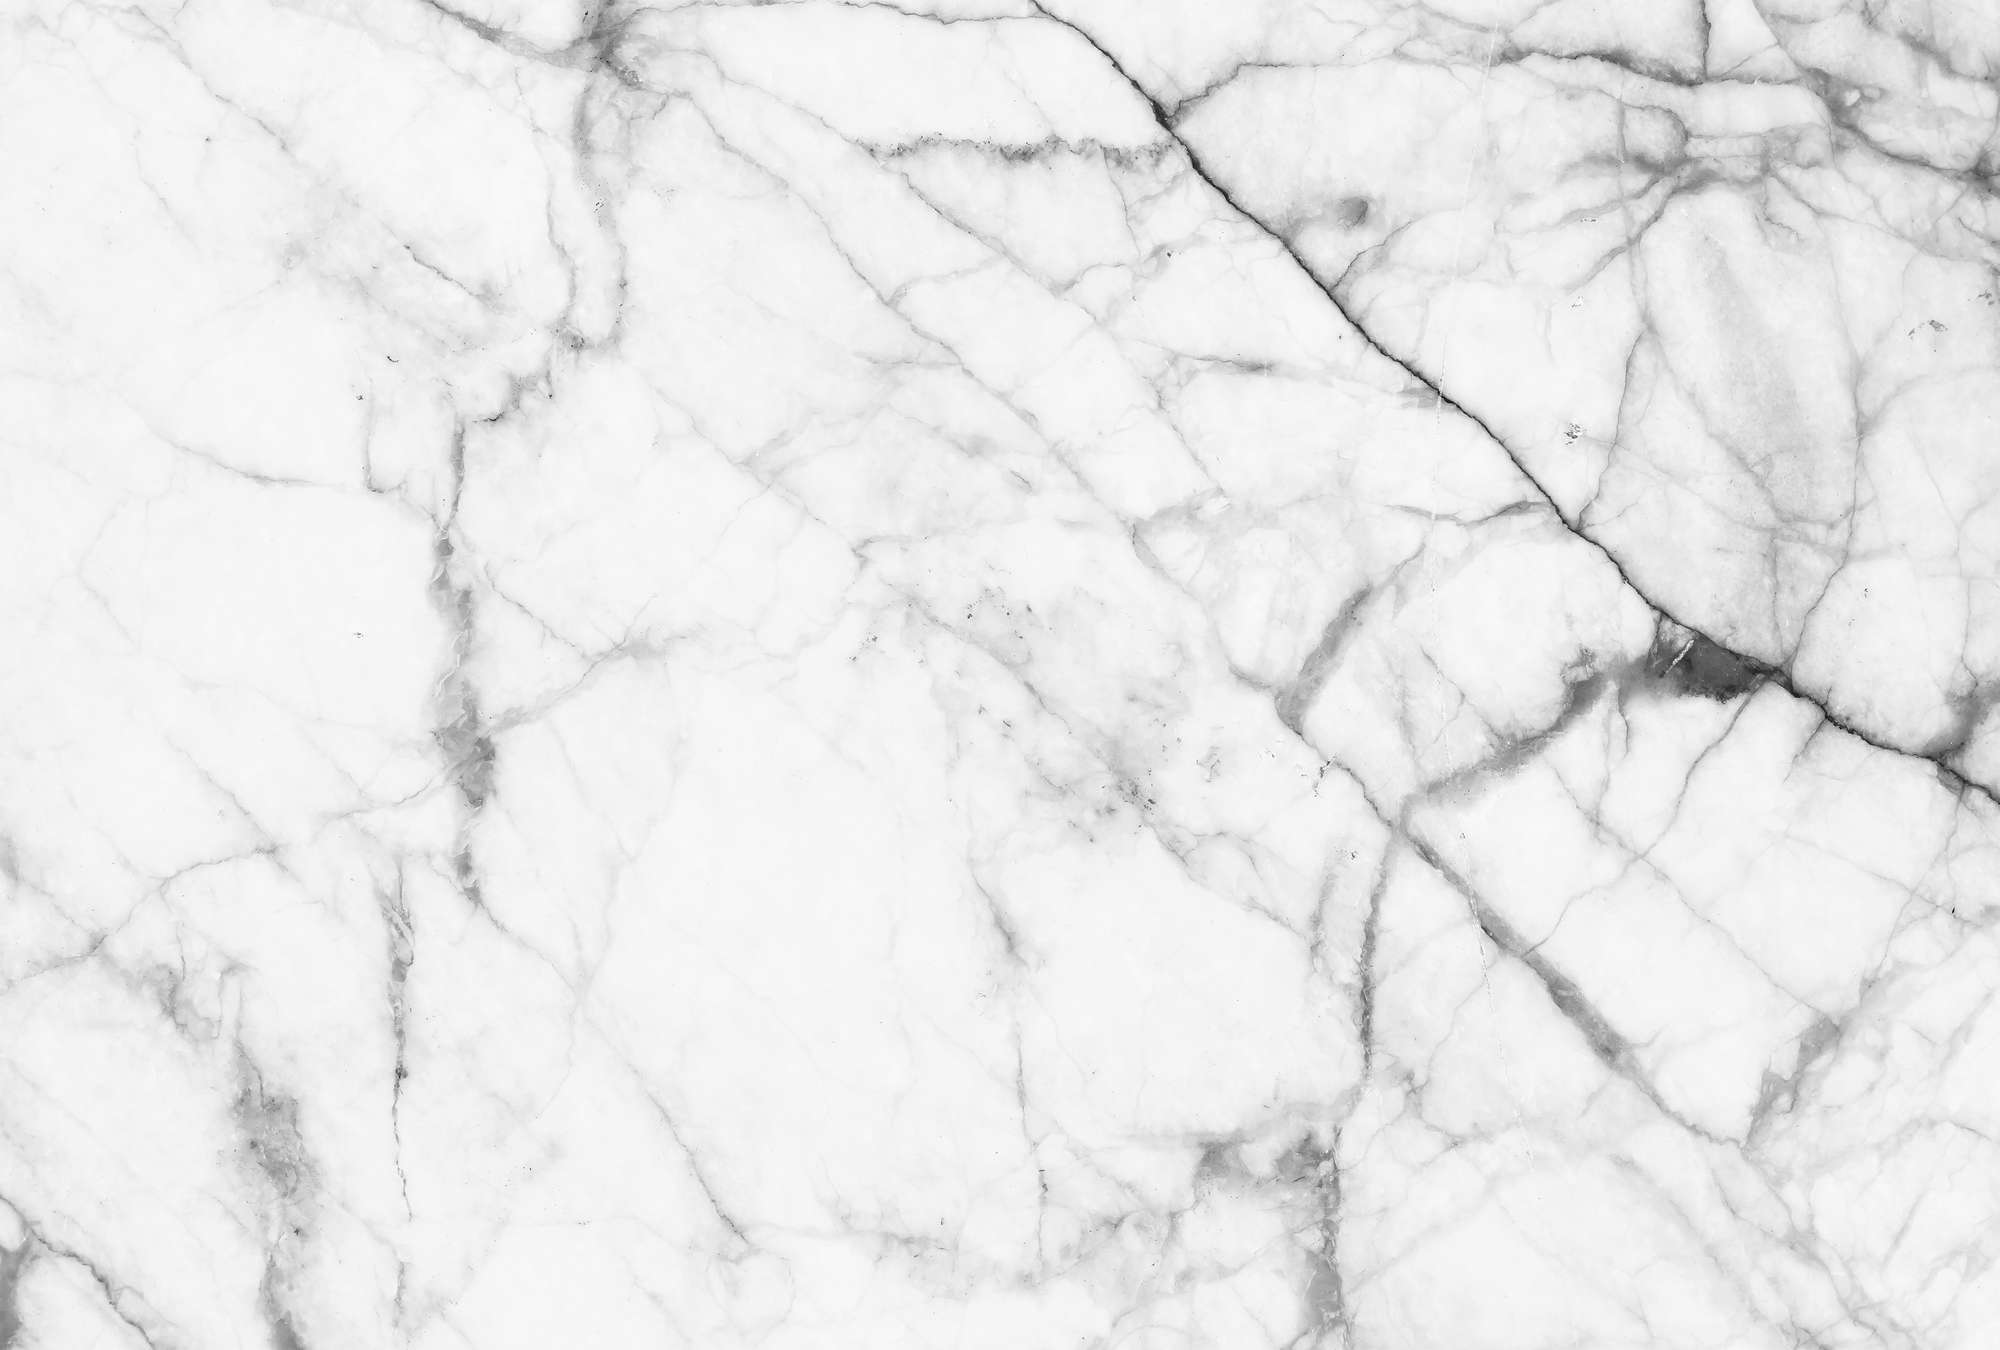             Black and white photo wallpaper marble with natural details
        